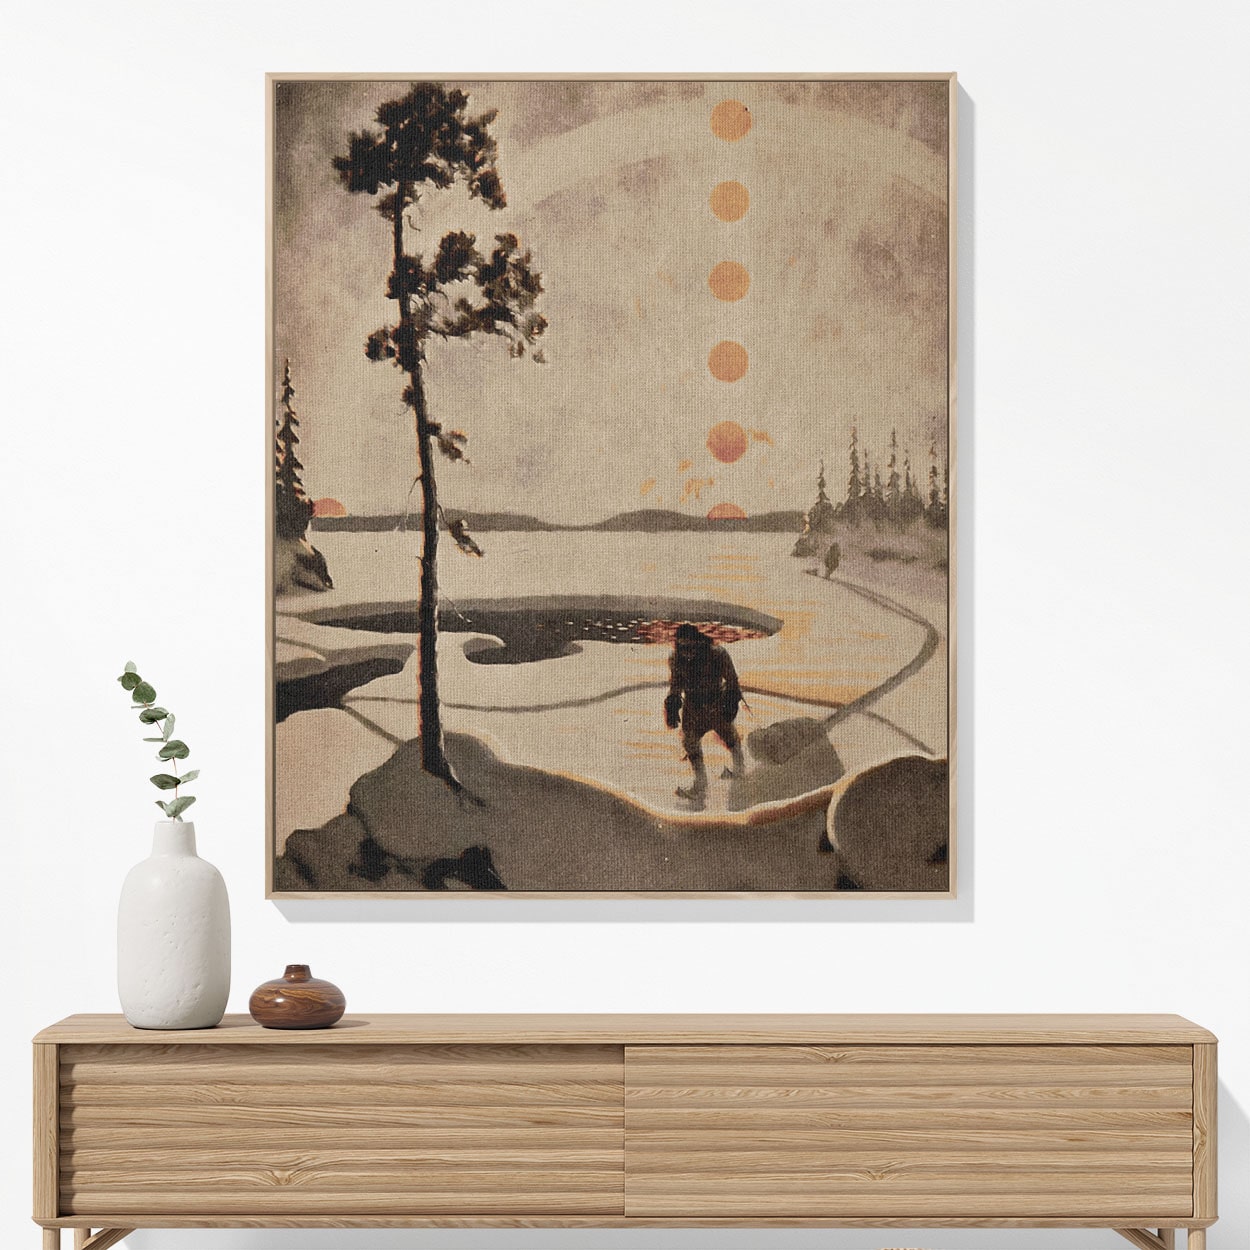 Winter Journey Woven Blanket Woven Blanket Hanging on a Wall as Framed Wall Art